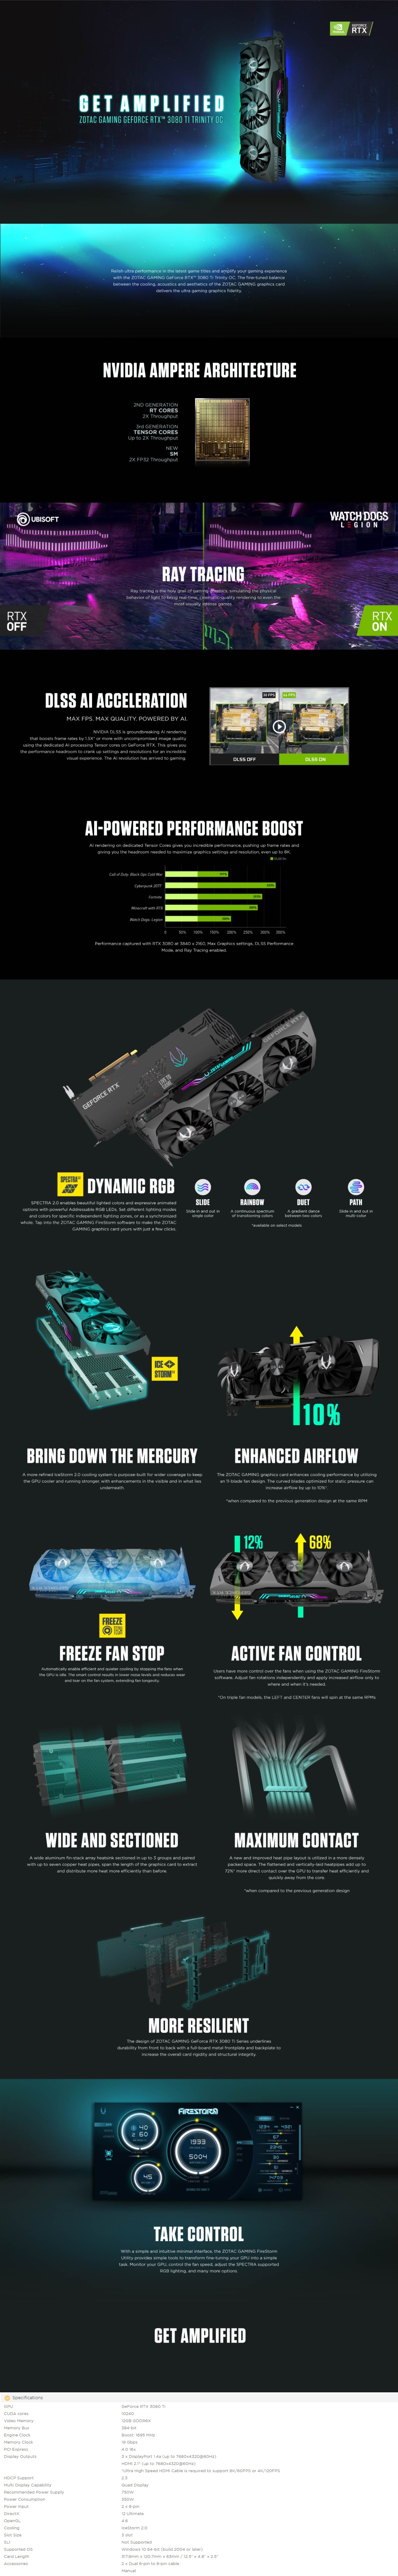 A large marketing image providing additional information about the product ZOTAC GAMING GeForce RTX 3080 Ti Trinity OC 12GB GDDR6X - Additional alt info not provided